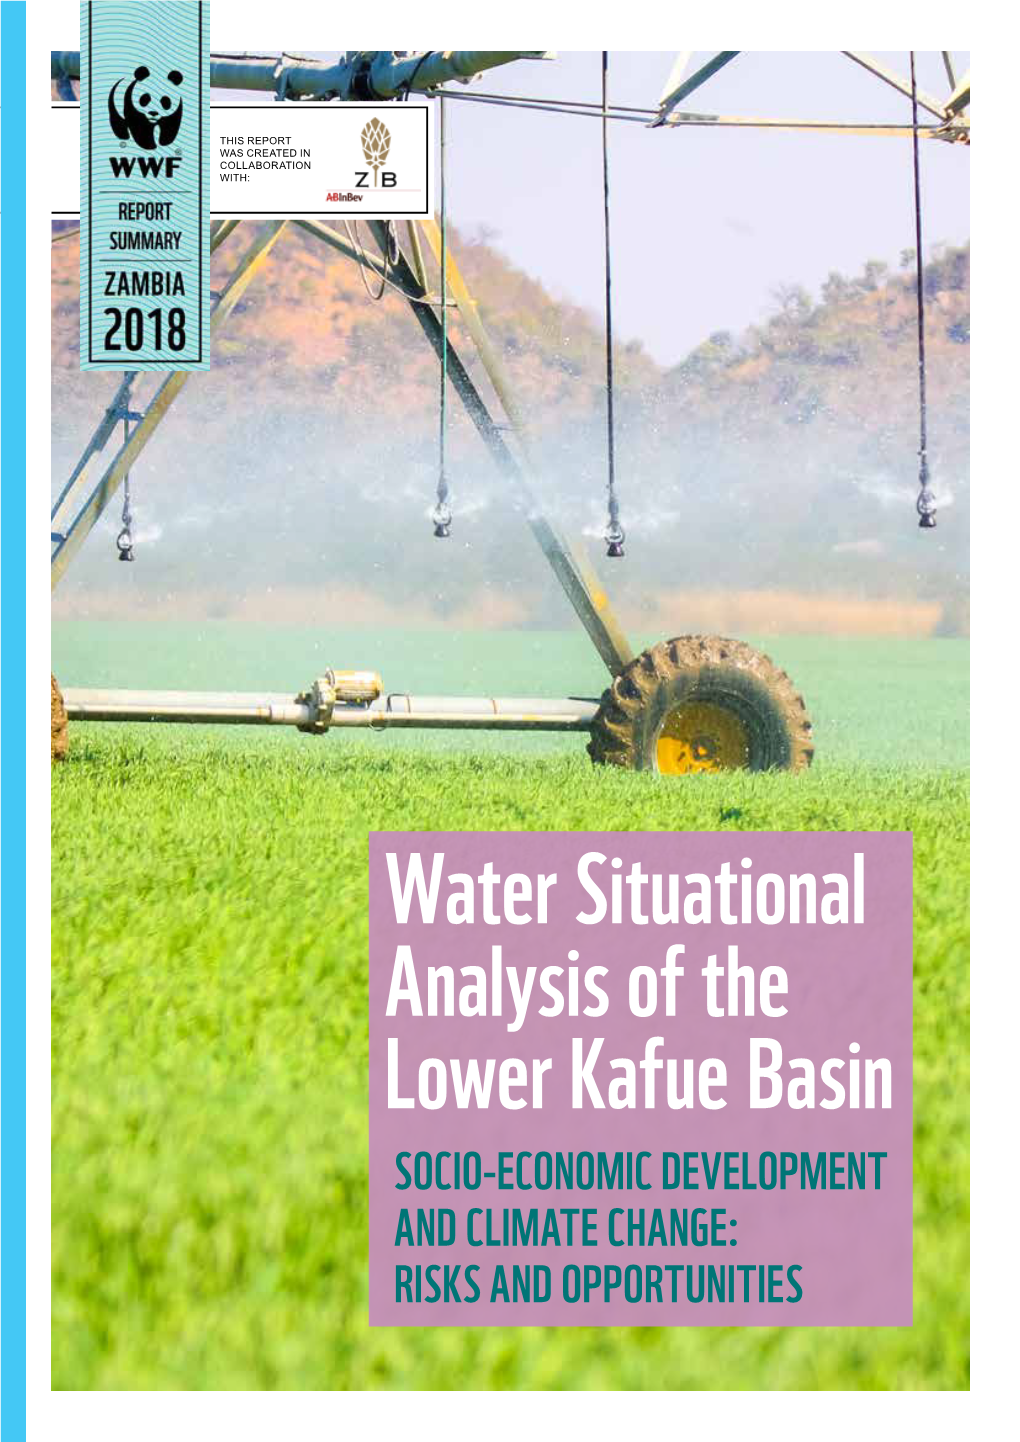 Water Situational Analysis of the Lower Kafue Basin SOCIO-ECONOMIC DEVELOPMENT and CLIMATE CHANGE: RISKS and OPPORTUNITIES